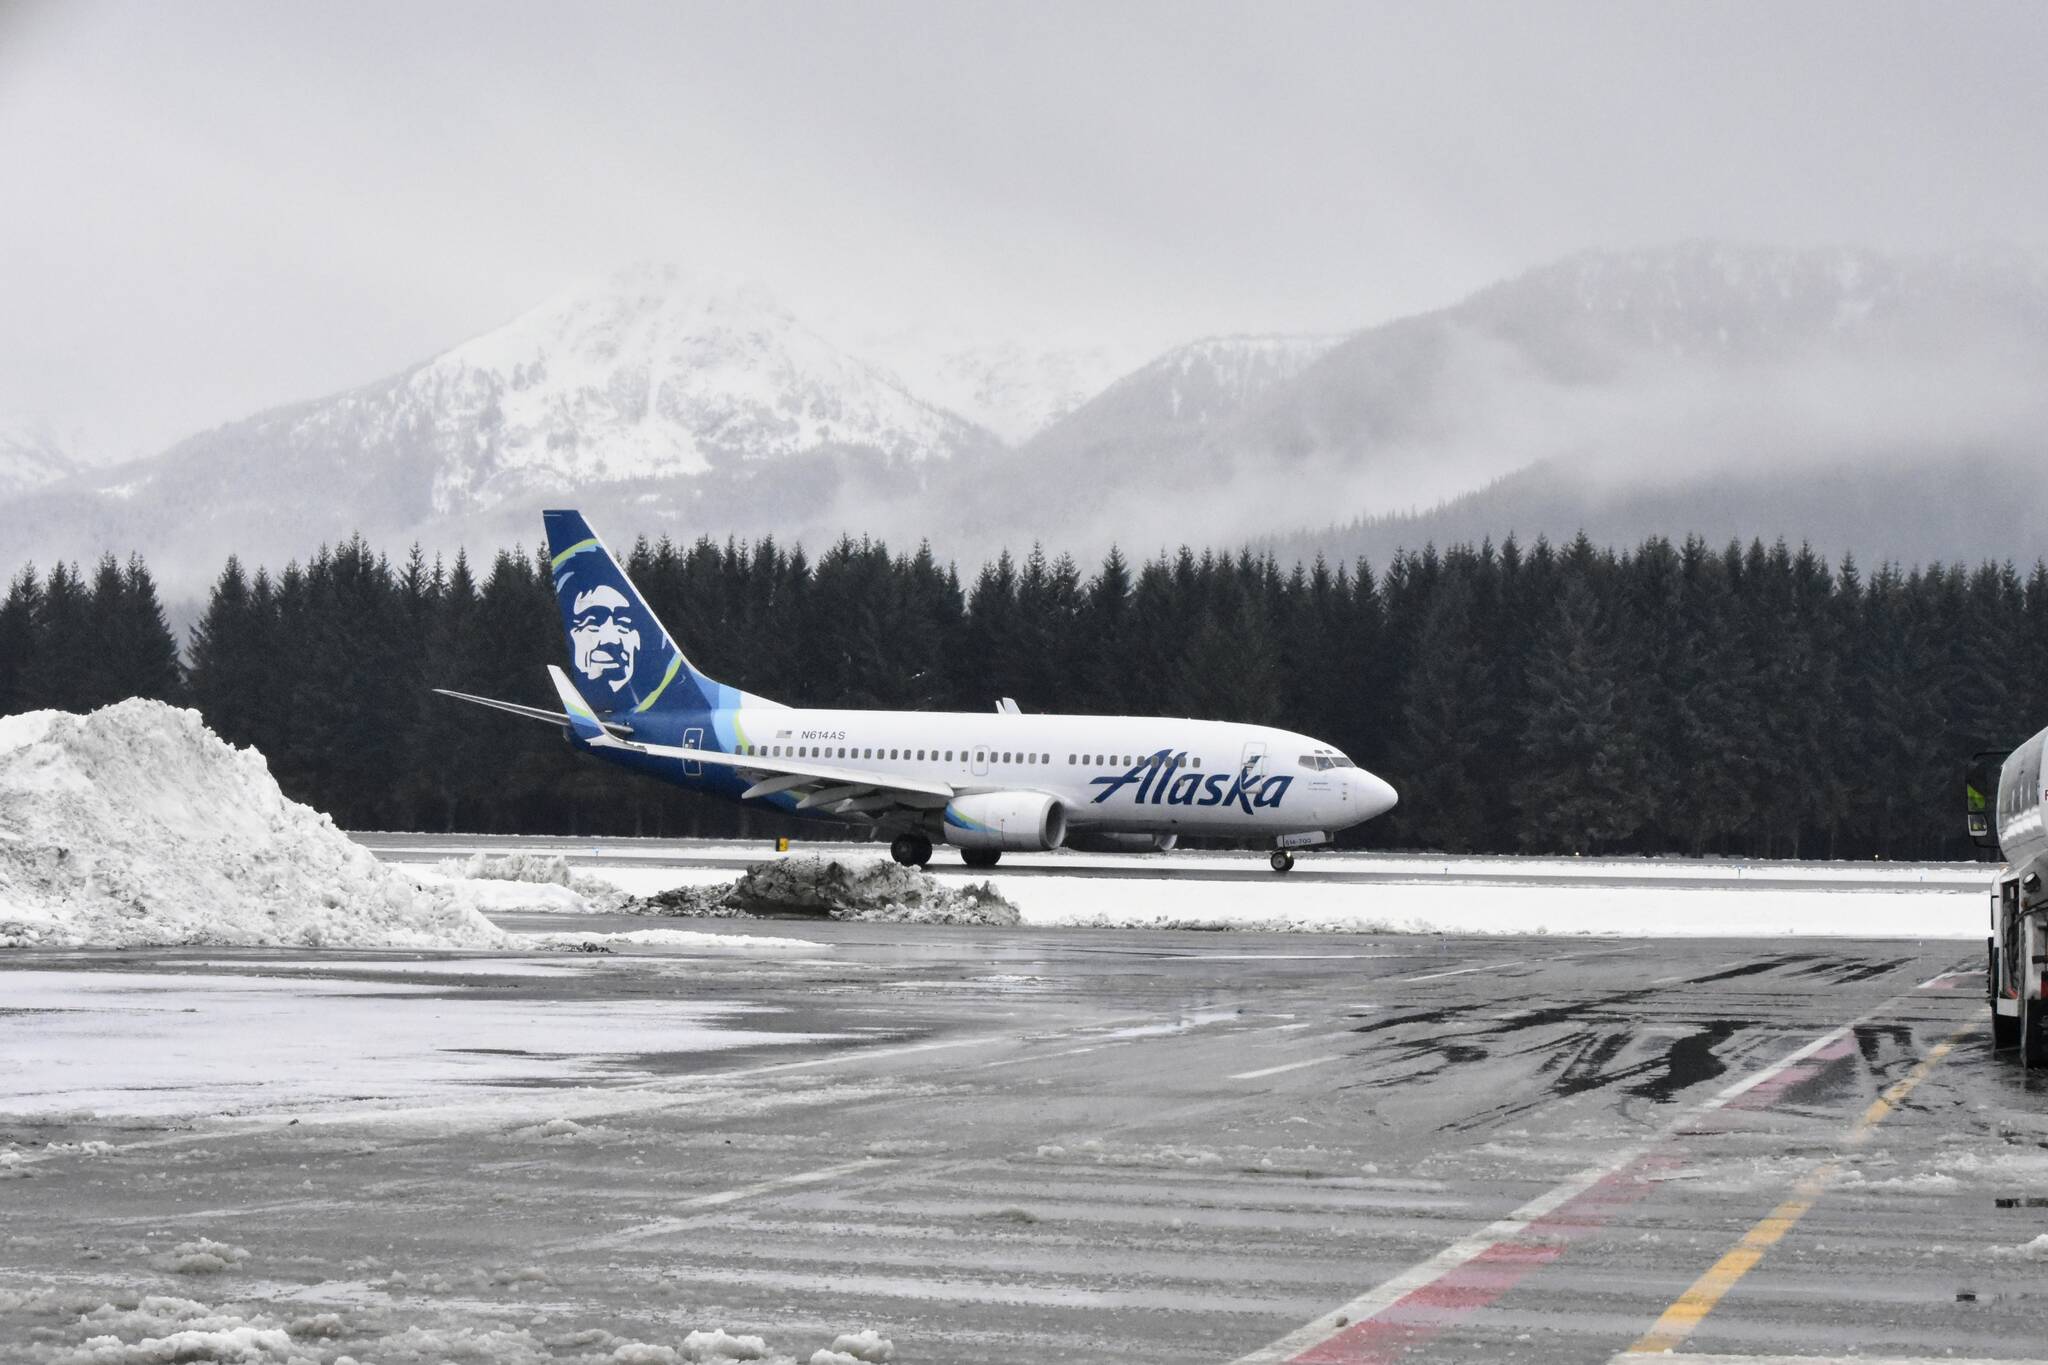 An Alaska Airlines flight lands at the Juneau International Airport. The National Weather Service has issued a winter storm watch for much many parts of the country from Thursday through Saturday. (Peter Segall / Juneau Empire File)